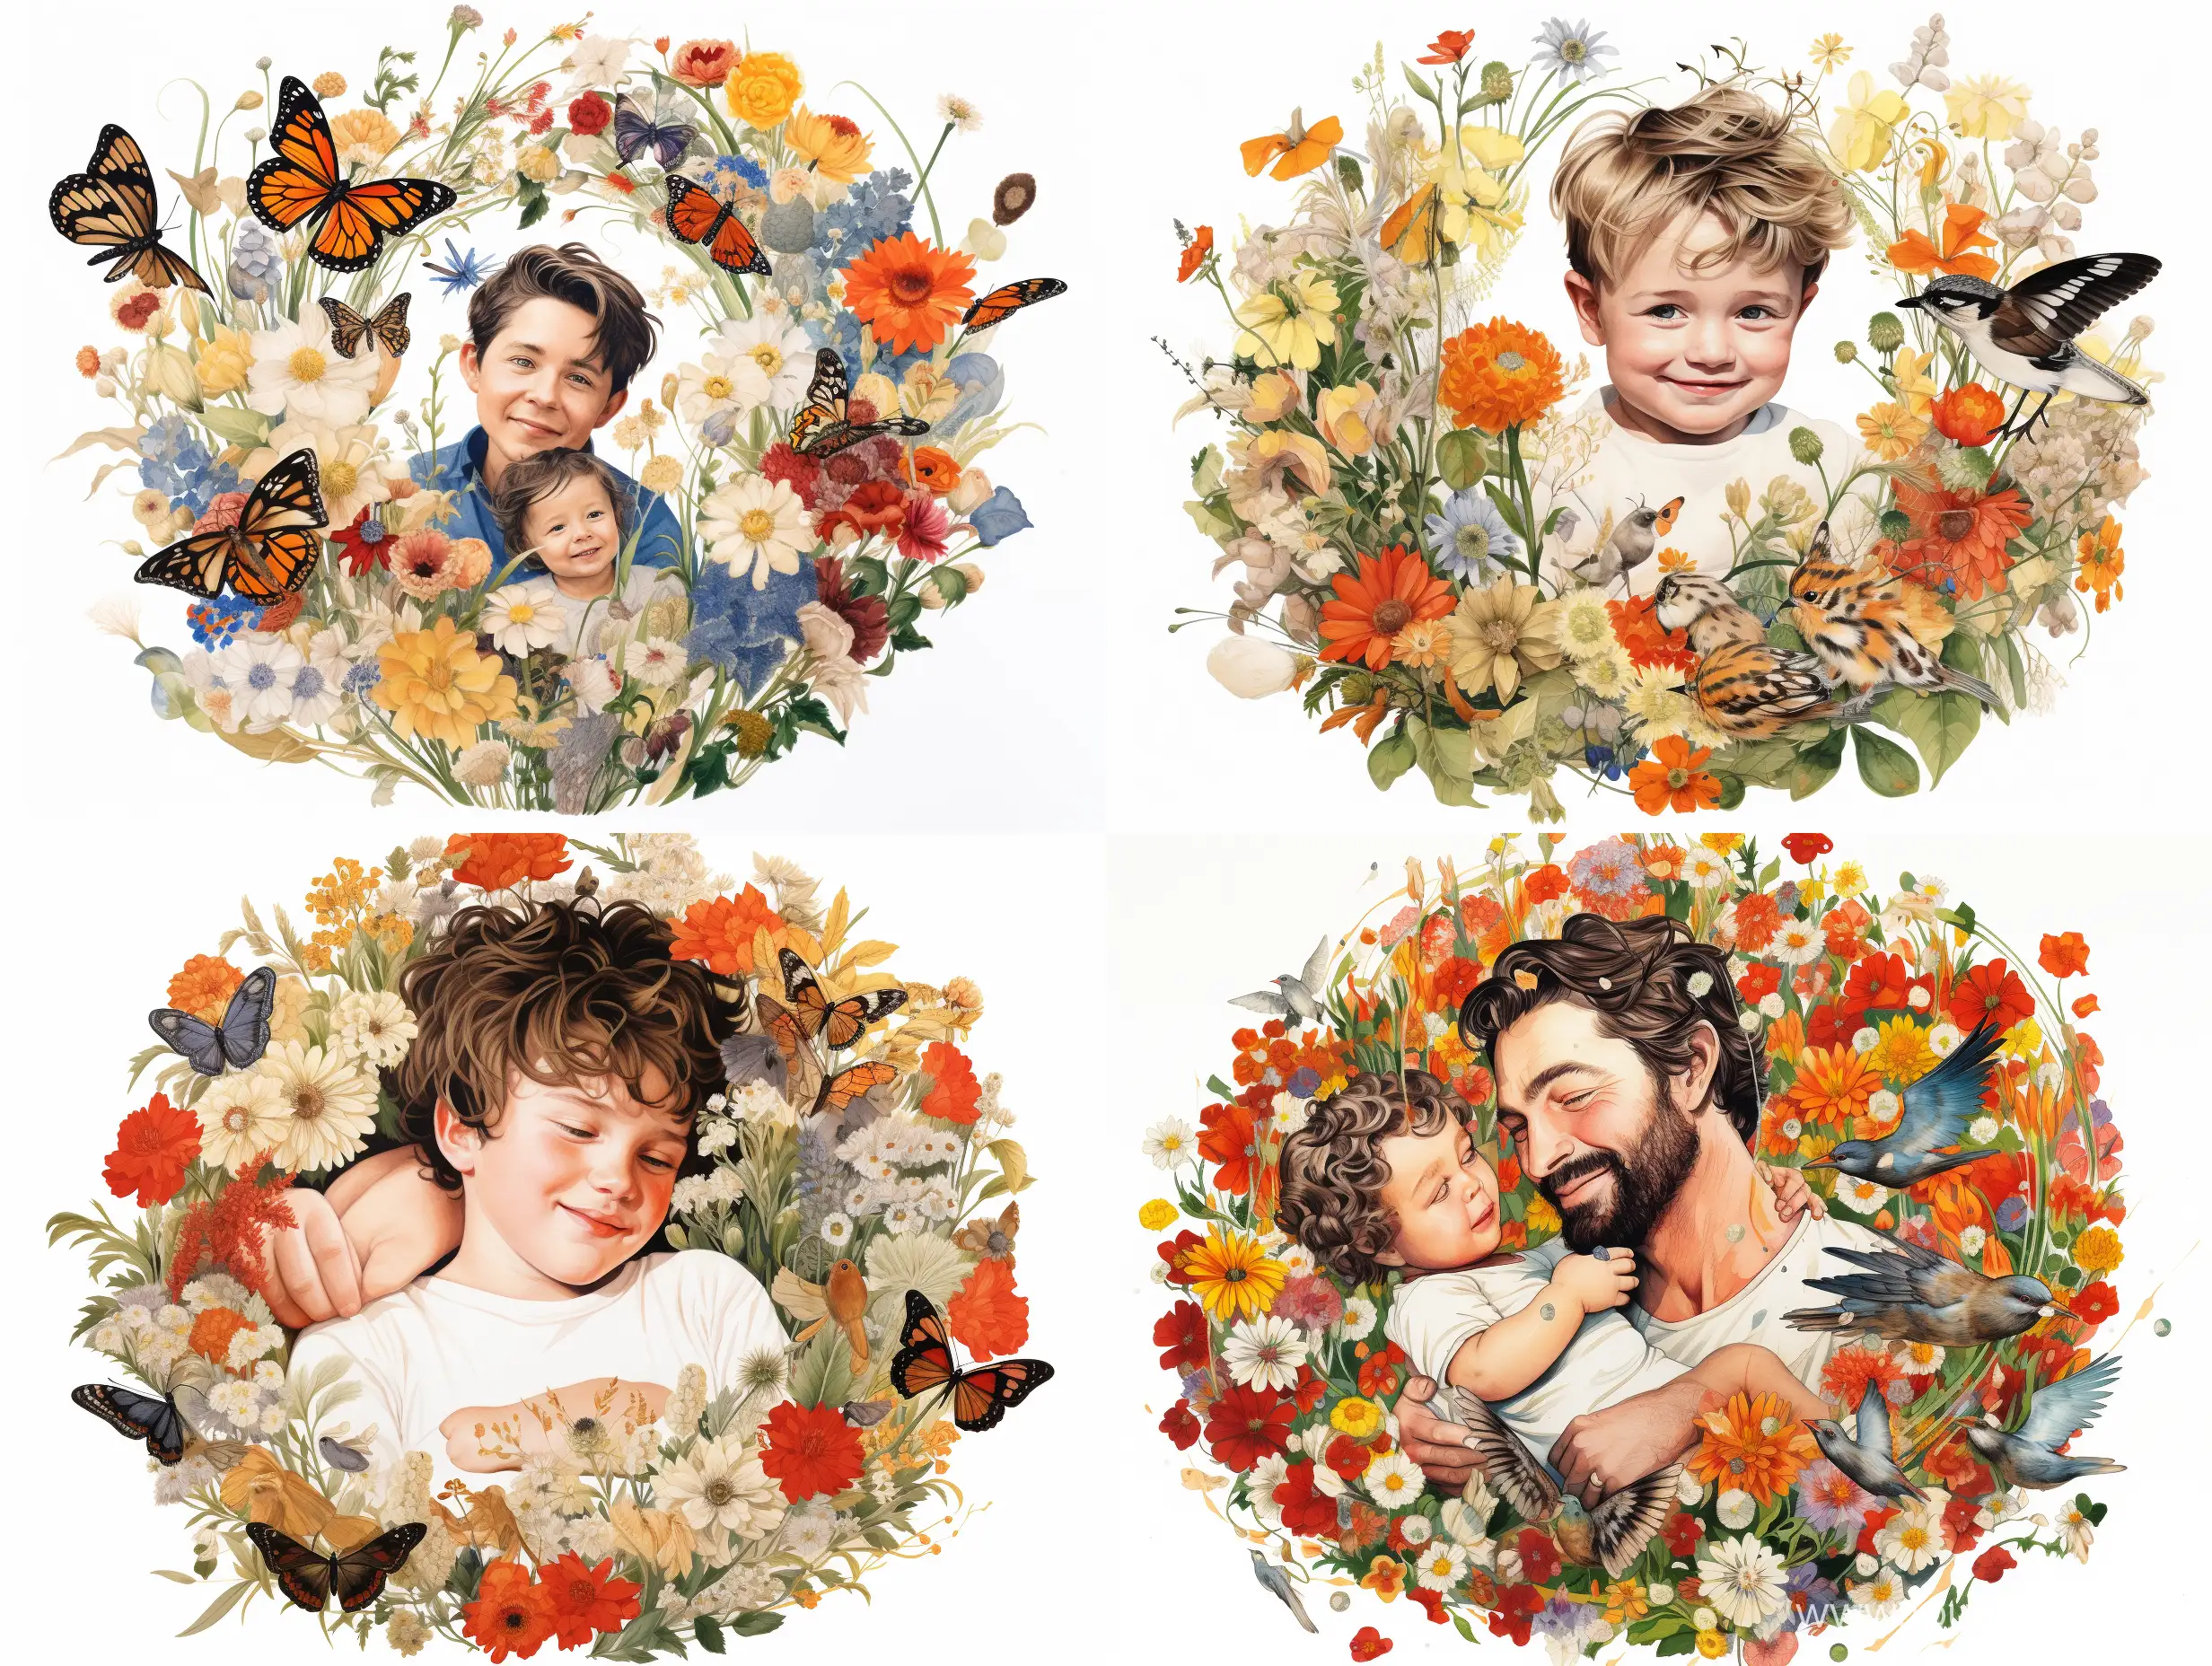 Joyful-Child-in-Fathers-Embrace-Surrounded-by-Flowers-and-Birds